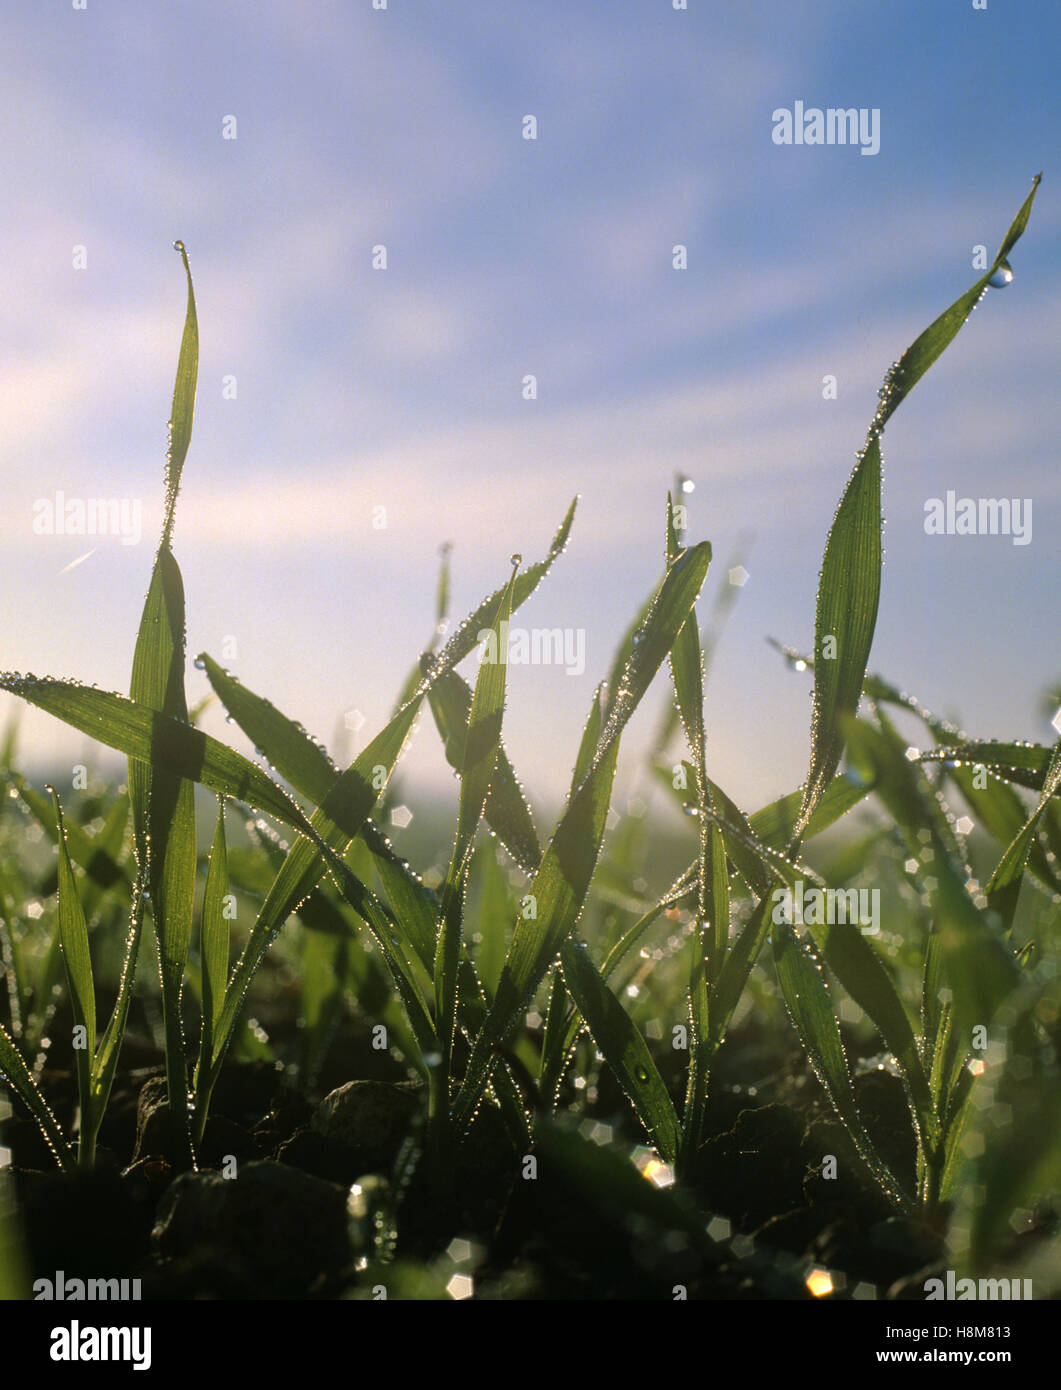 Ground level view of young seedling barley plants with dew droplets photographed against the early morning sunshire Stock Photo